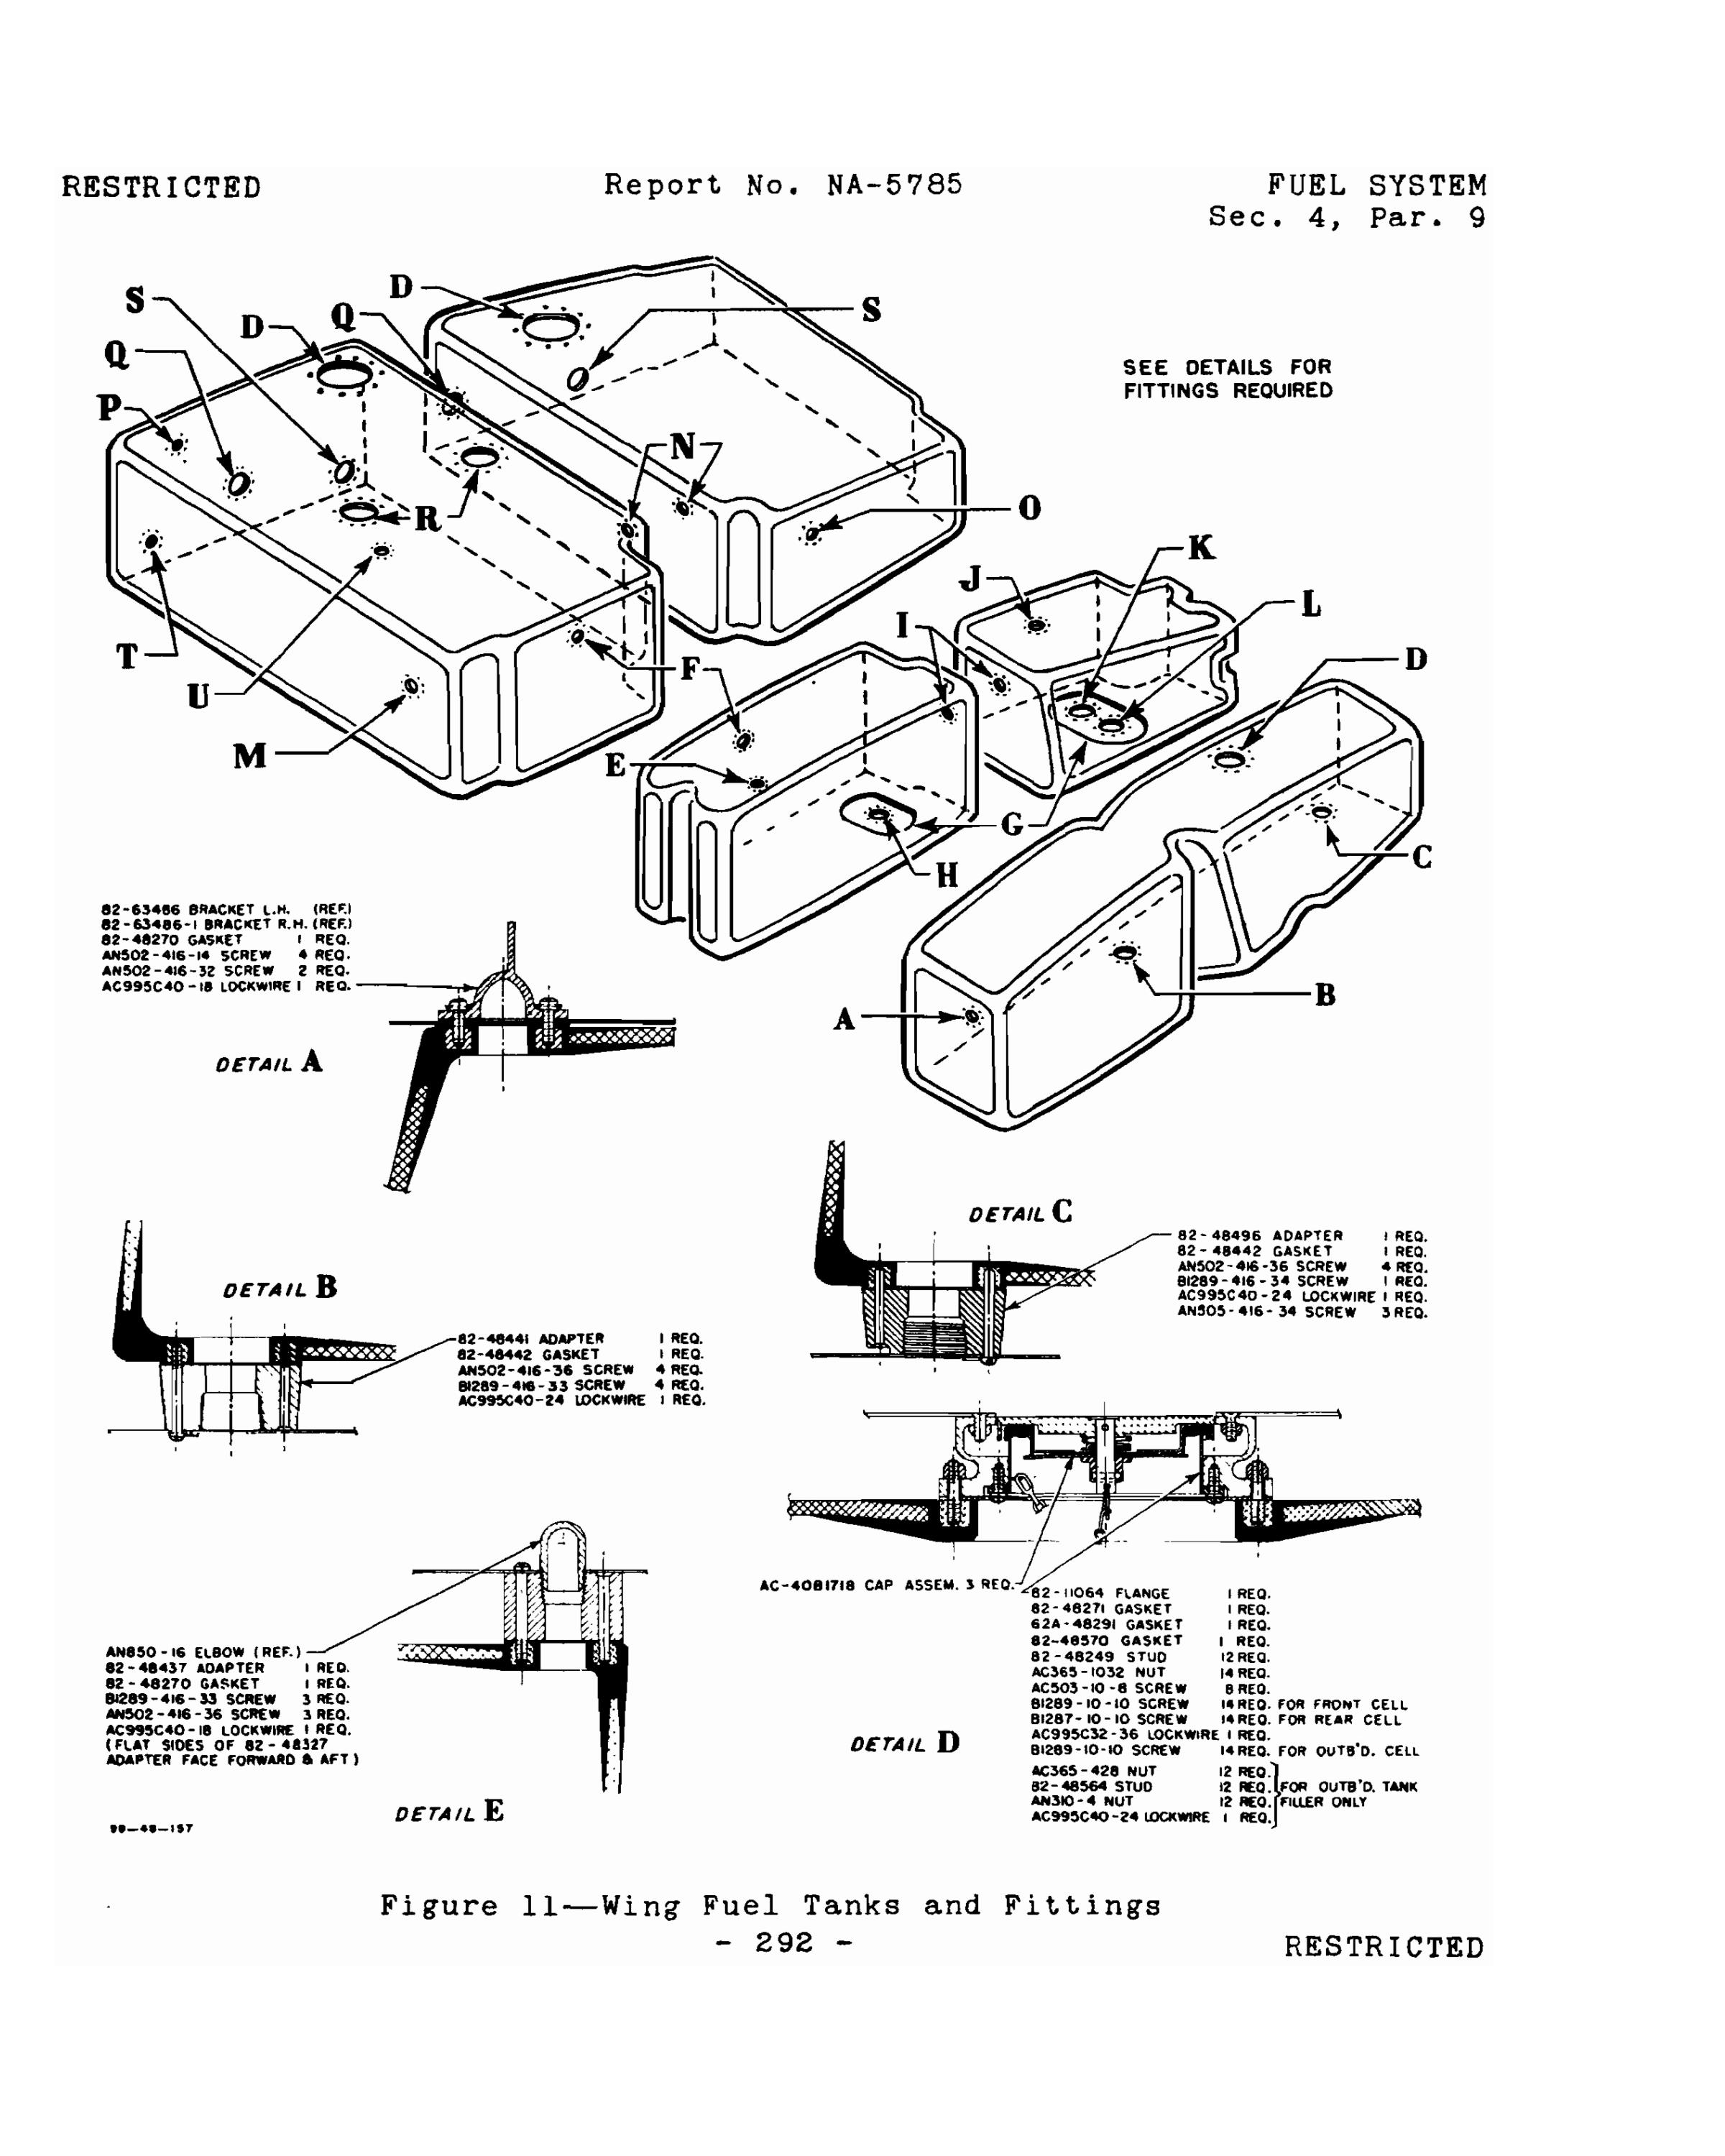 Sample page 328 from AirCorps Library document: Erection & Maintenance - B-25H